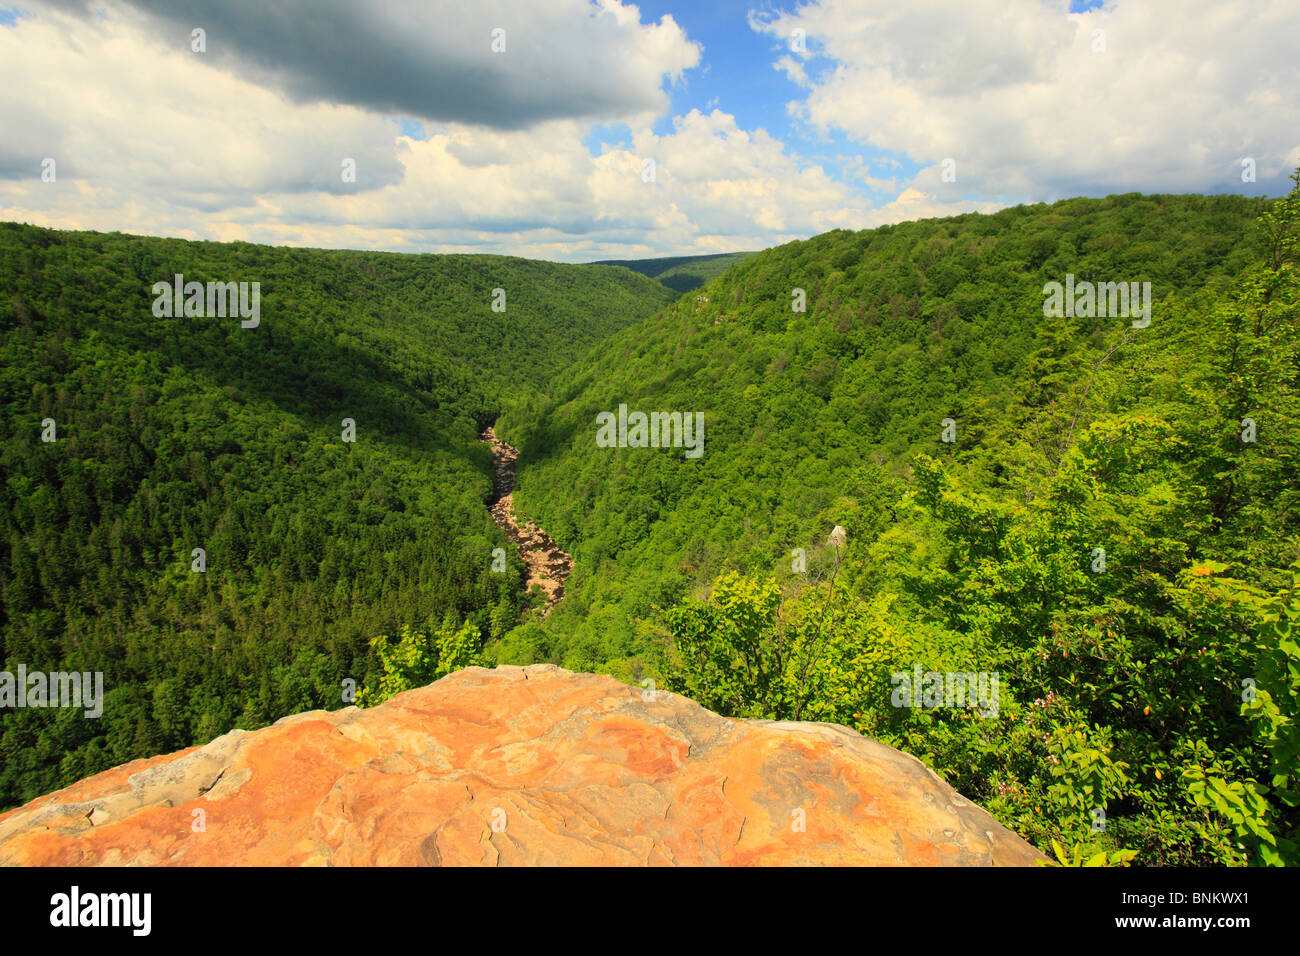 Hiker looks into Blackwater River Canyon from Pendleton Point Overlook, Blackwater Falls State Park, Davis, West Virginia, USA Stock Photo